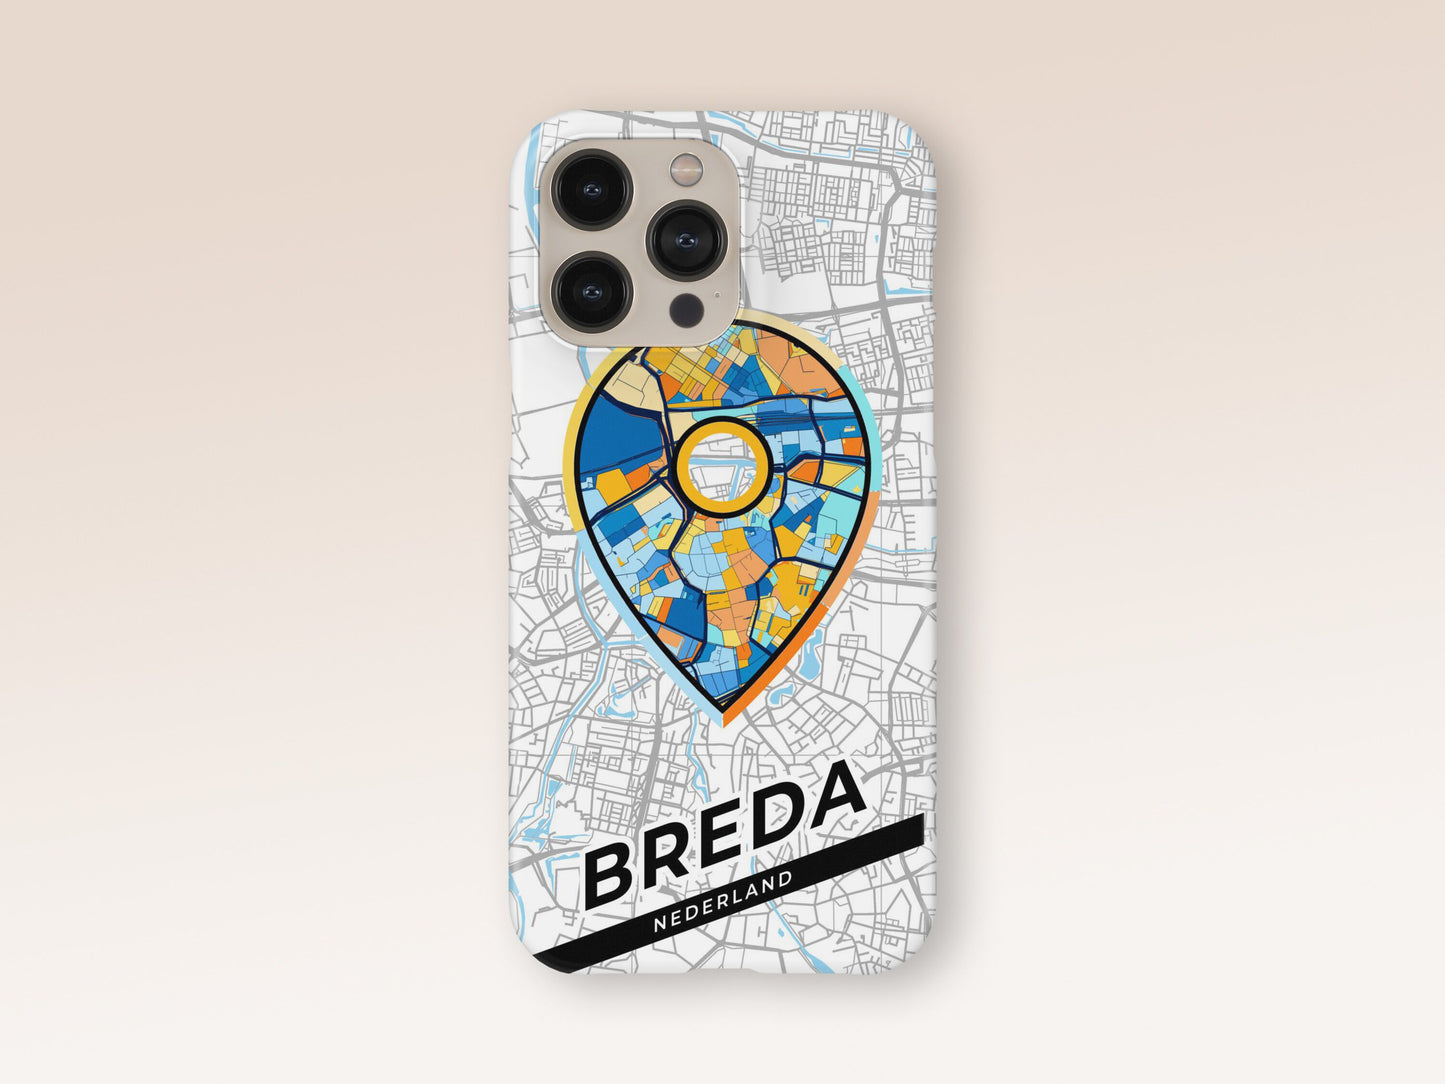 Breda Netherlands slim phone case with colorful icon. Birthday, wedding or housewarming gift. Couple match cases. 1